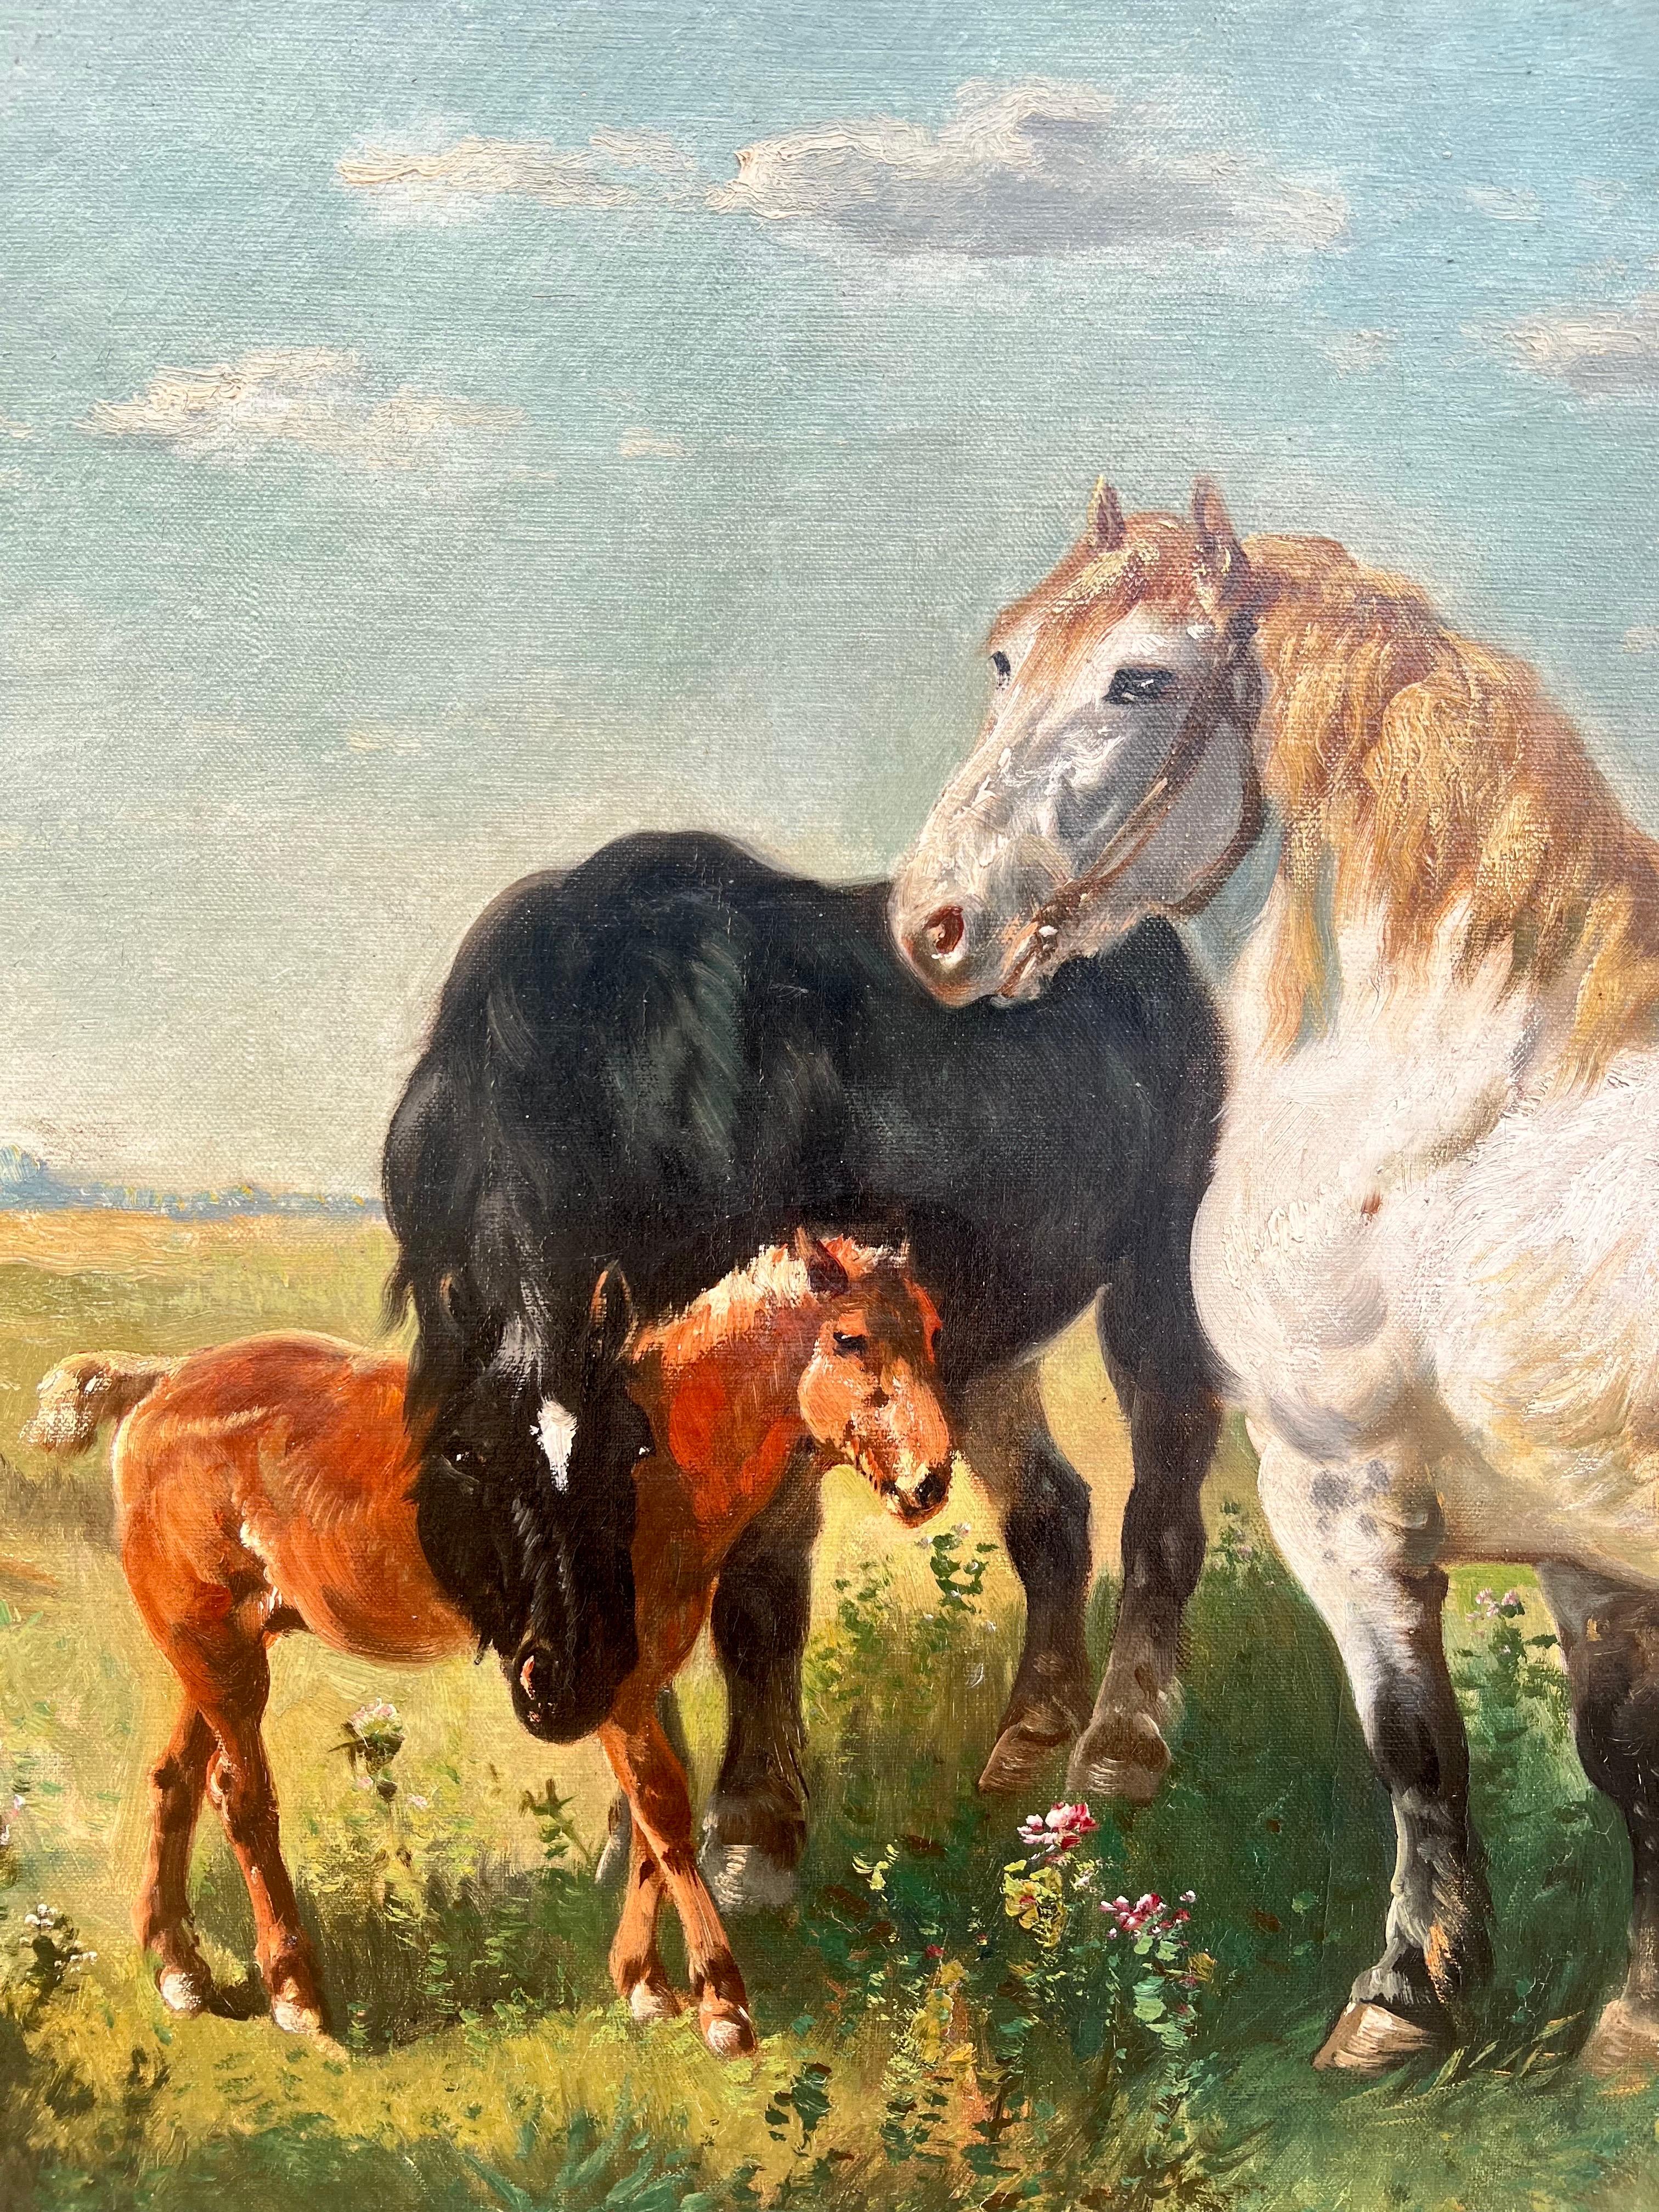 Large 19th century romantic oil - A loving horse family - Countryside landscape - Romantic Painting by Henry Schouten